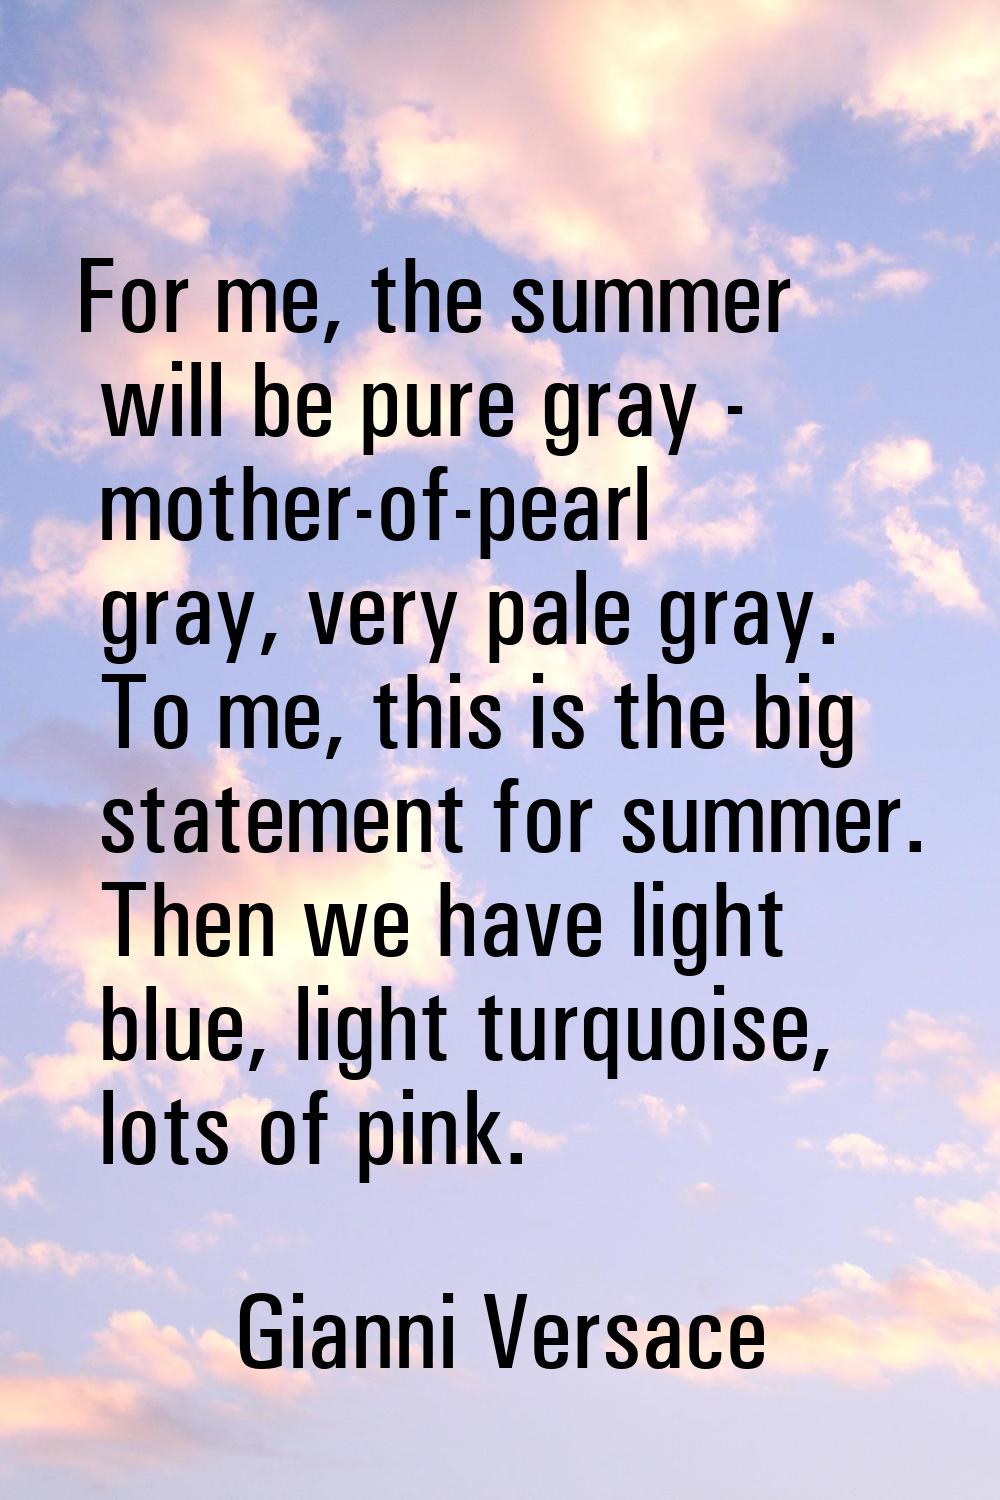 For me, the summer will be pure gray - mother-of-pearl gray, very pale gray. To me, this is the big